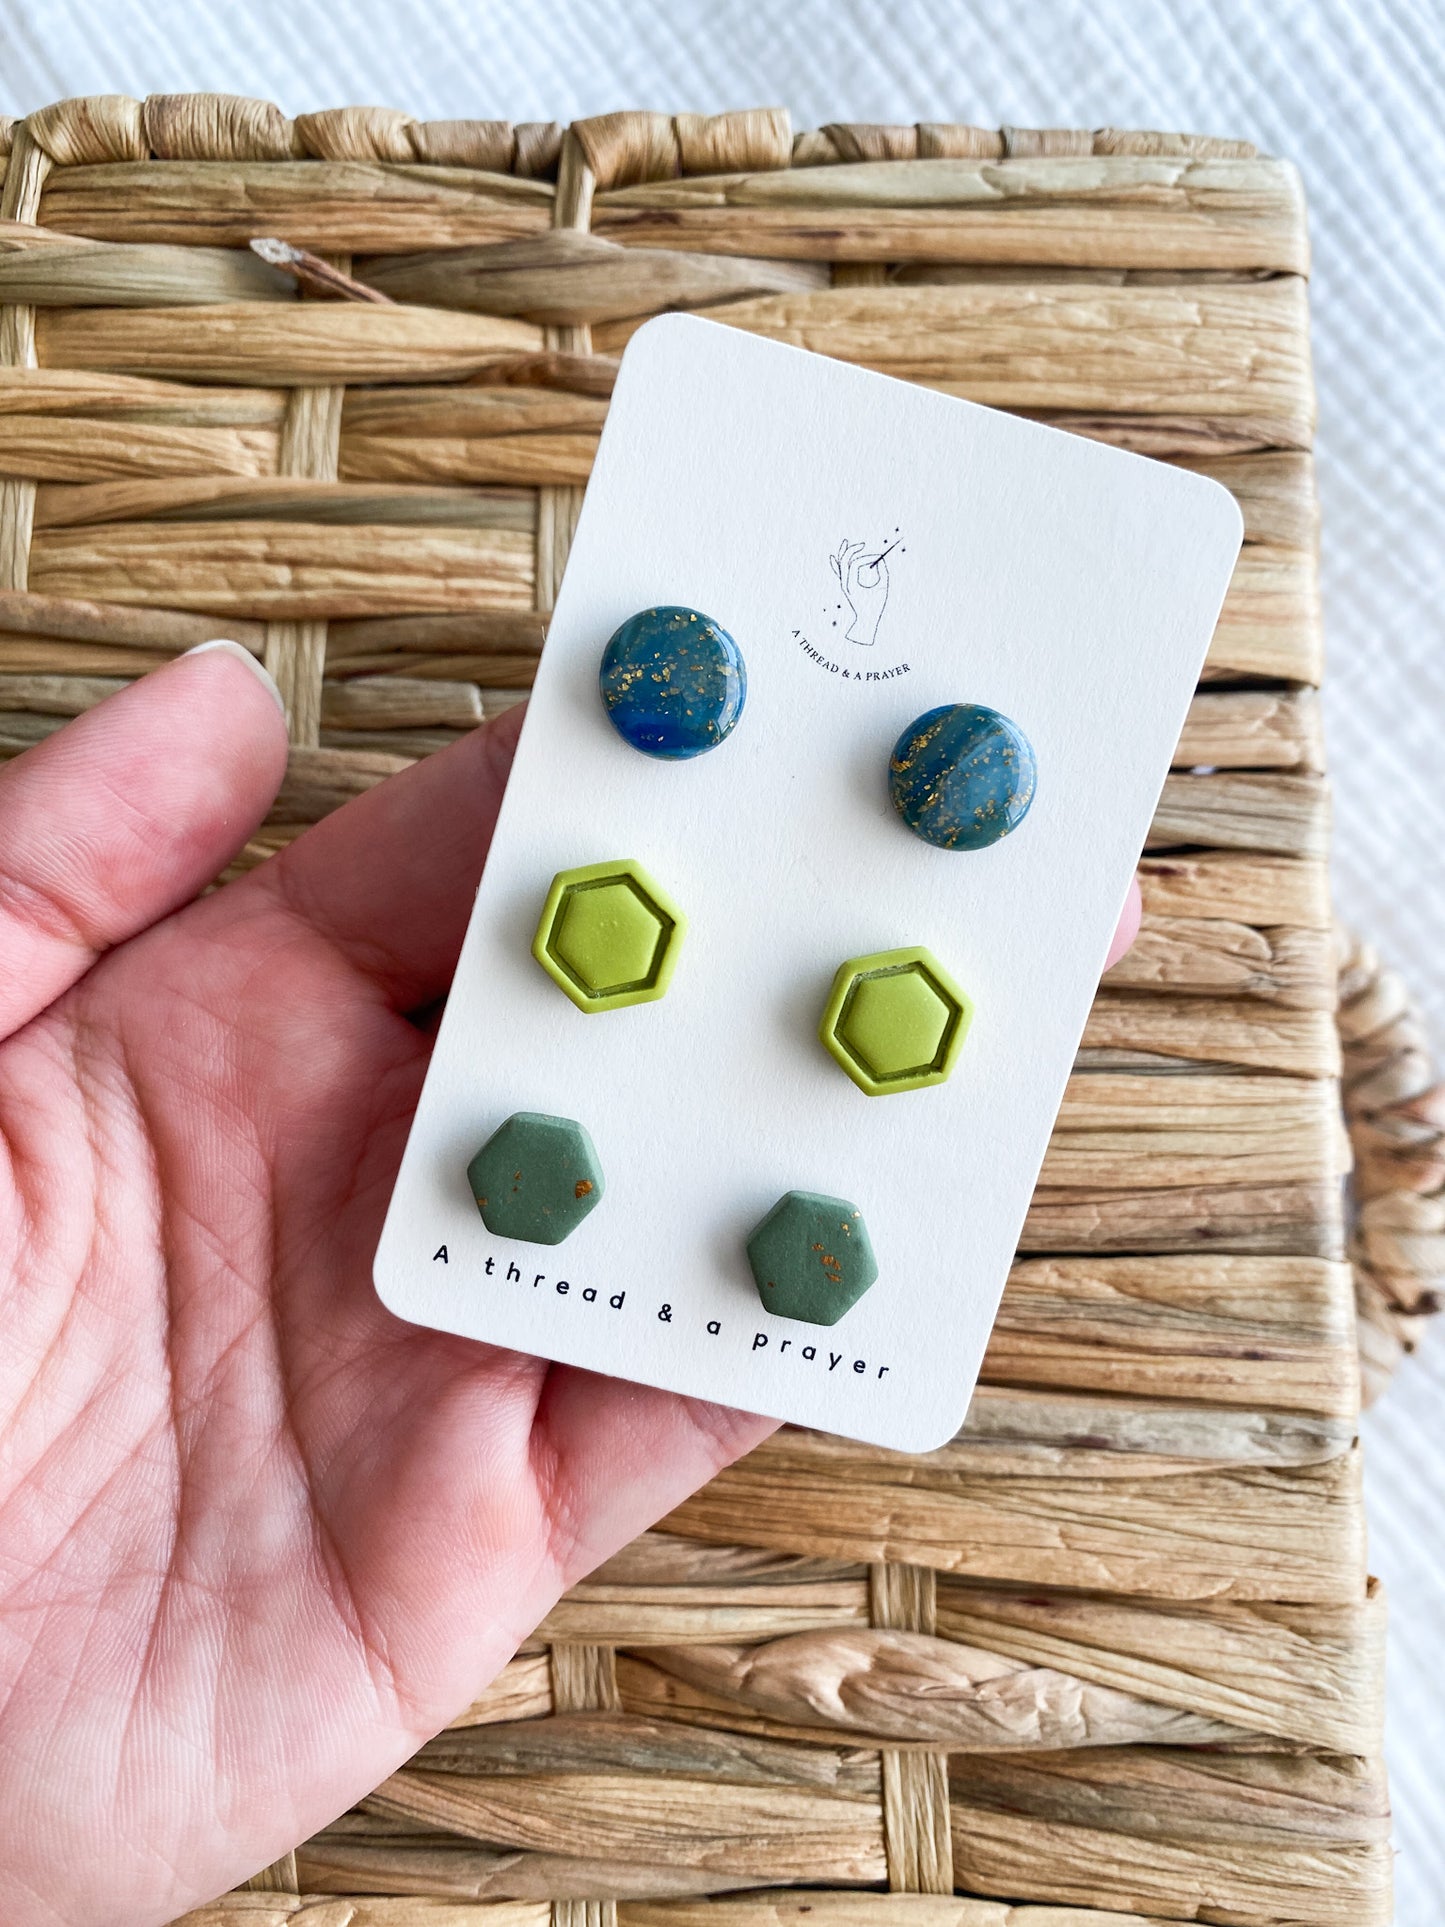 Neon and Funky Stud Pack Earrings | Summer Clay Stud Earrings | Polymer Clay Studs | Lightweight Earrings